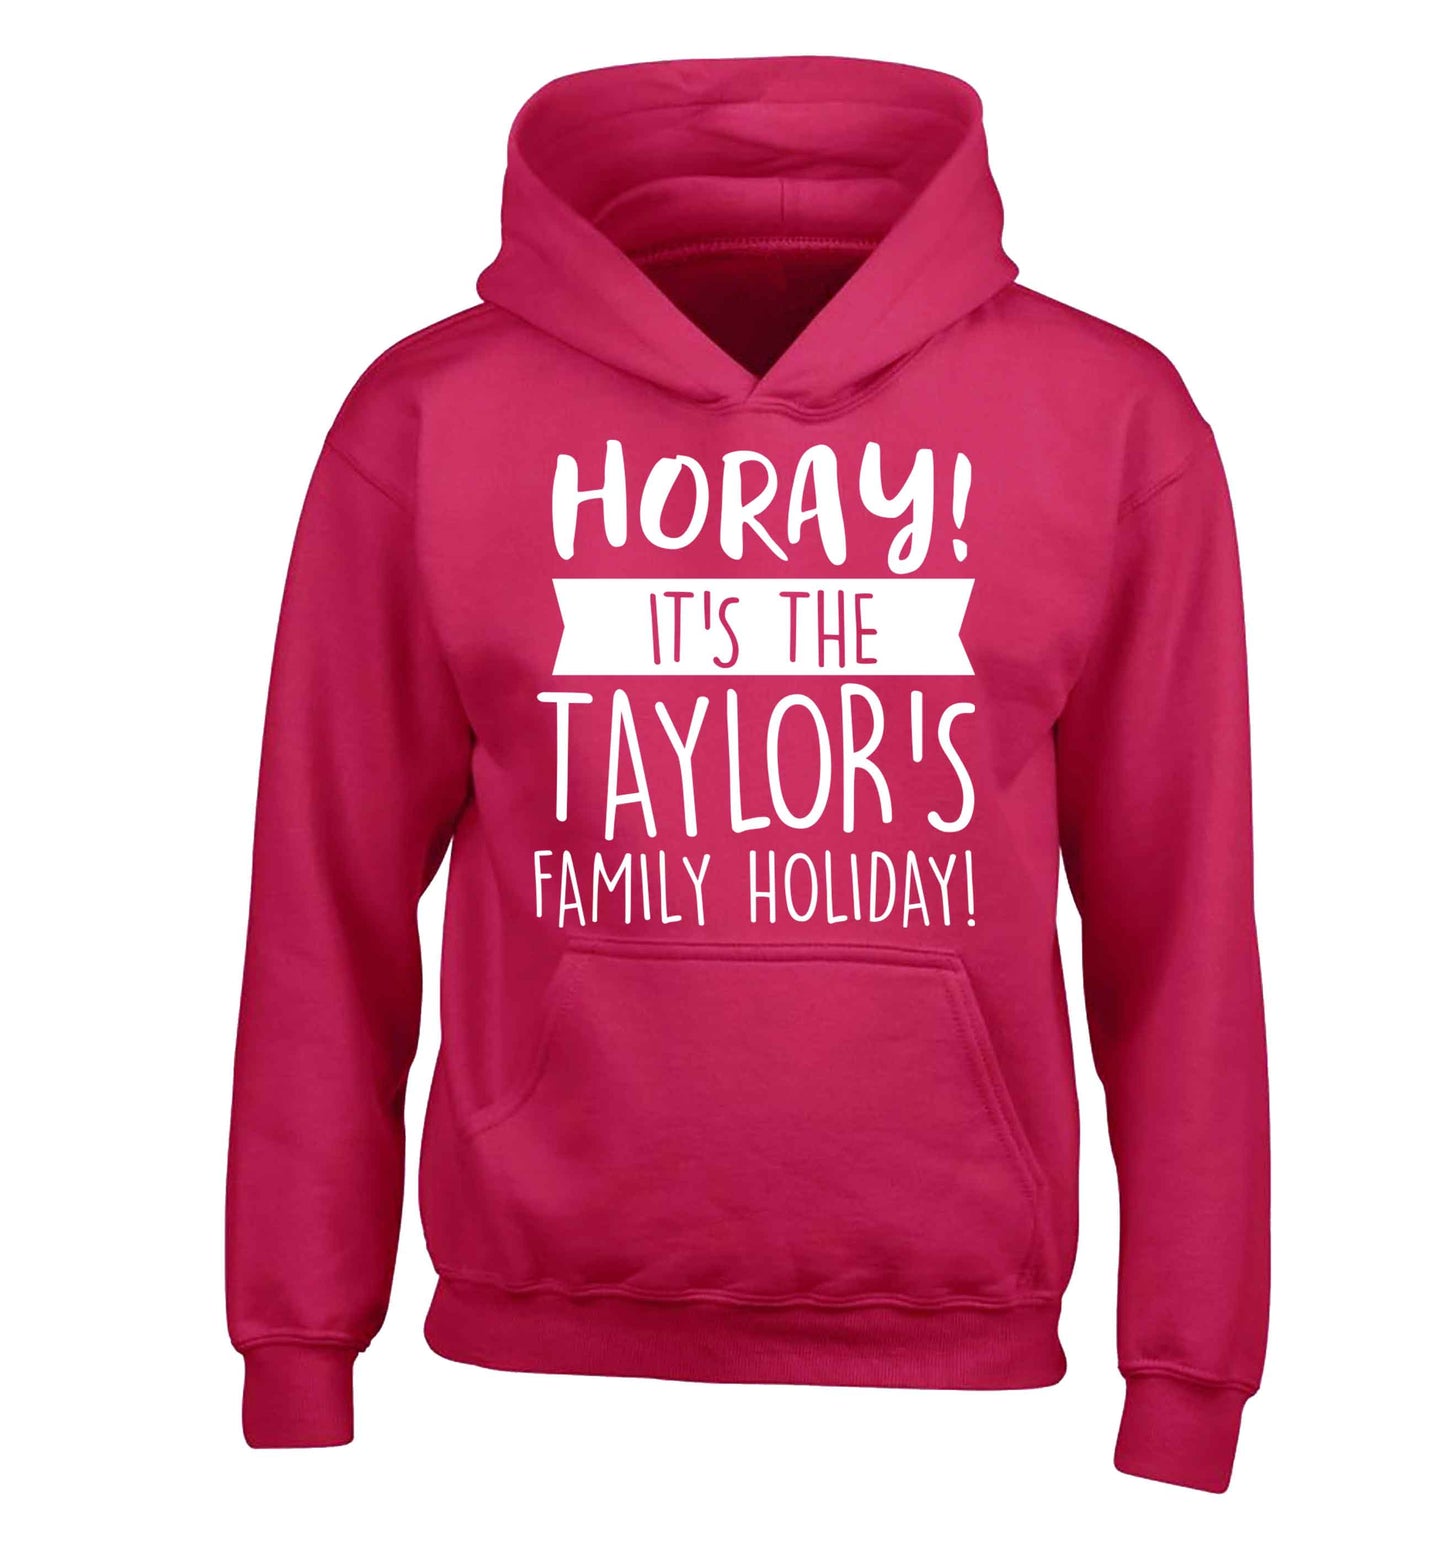 Horay it's the Taylor's family holiday! personalised item children's pink hoodie 12-13 Years